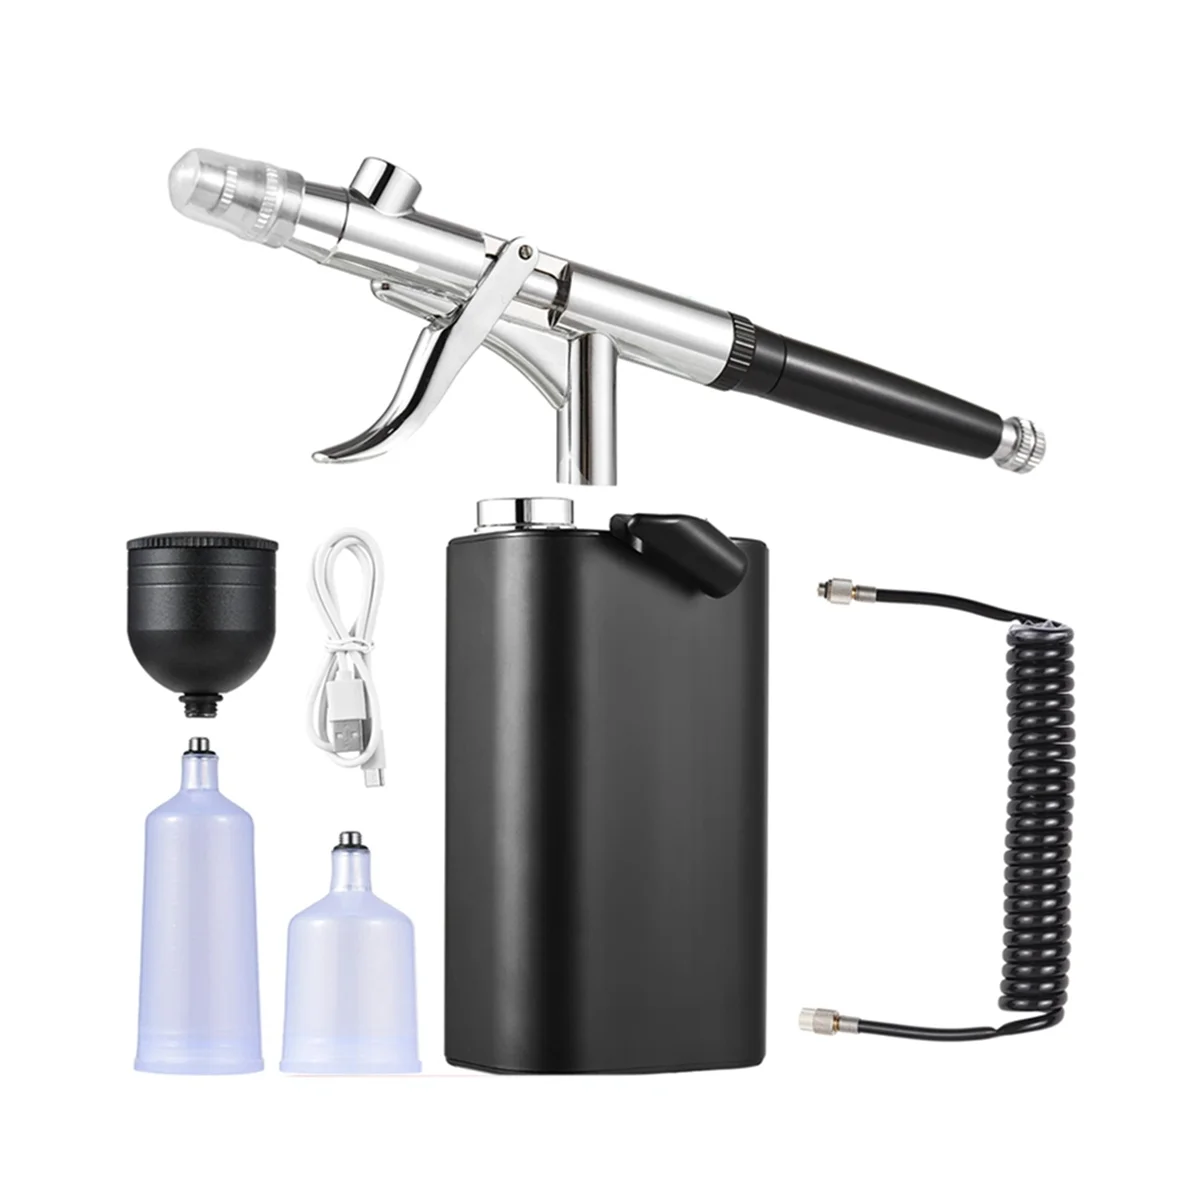 

40PSI High Pressure Airbrush Kit Cordless Handheld Air Brushes with 0.3mm Tip with Compressor for Painting/Tattoo